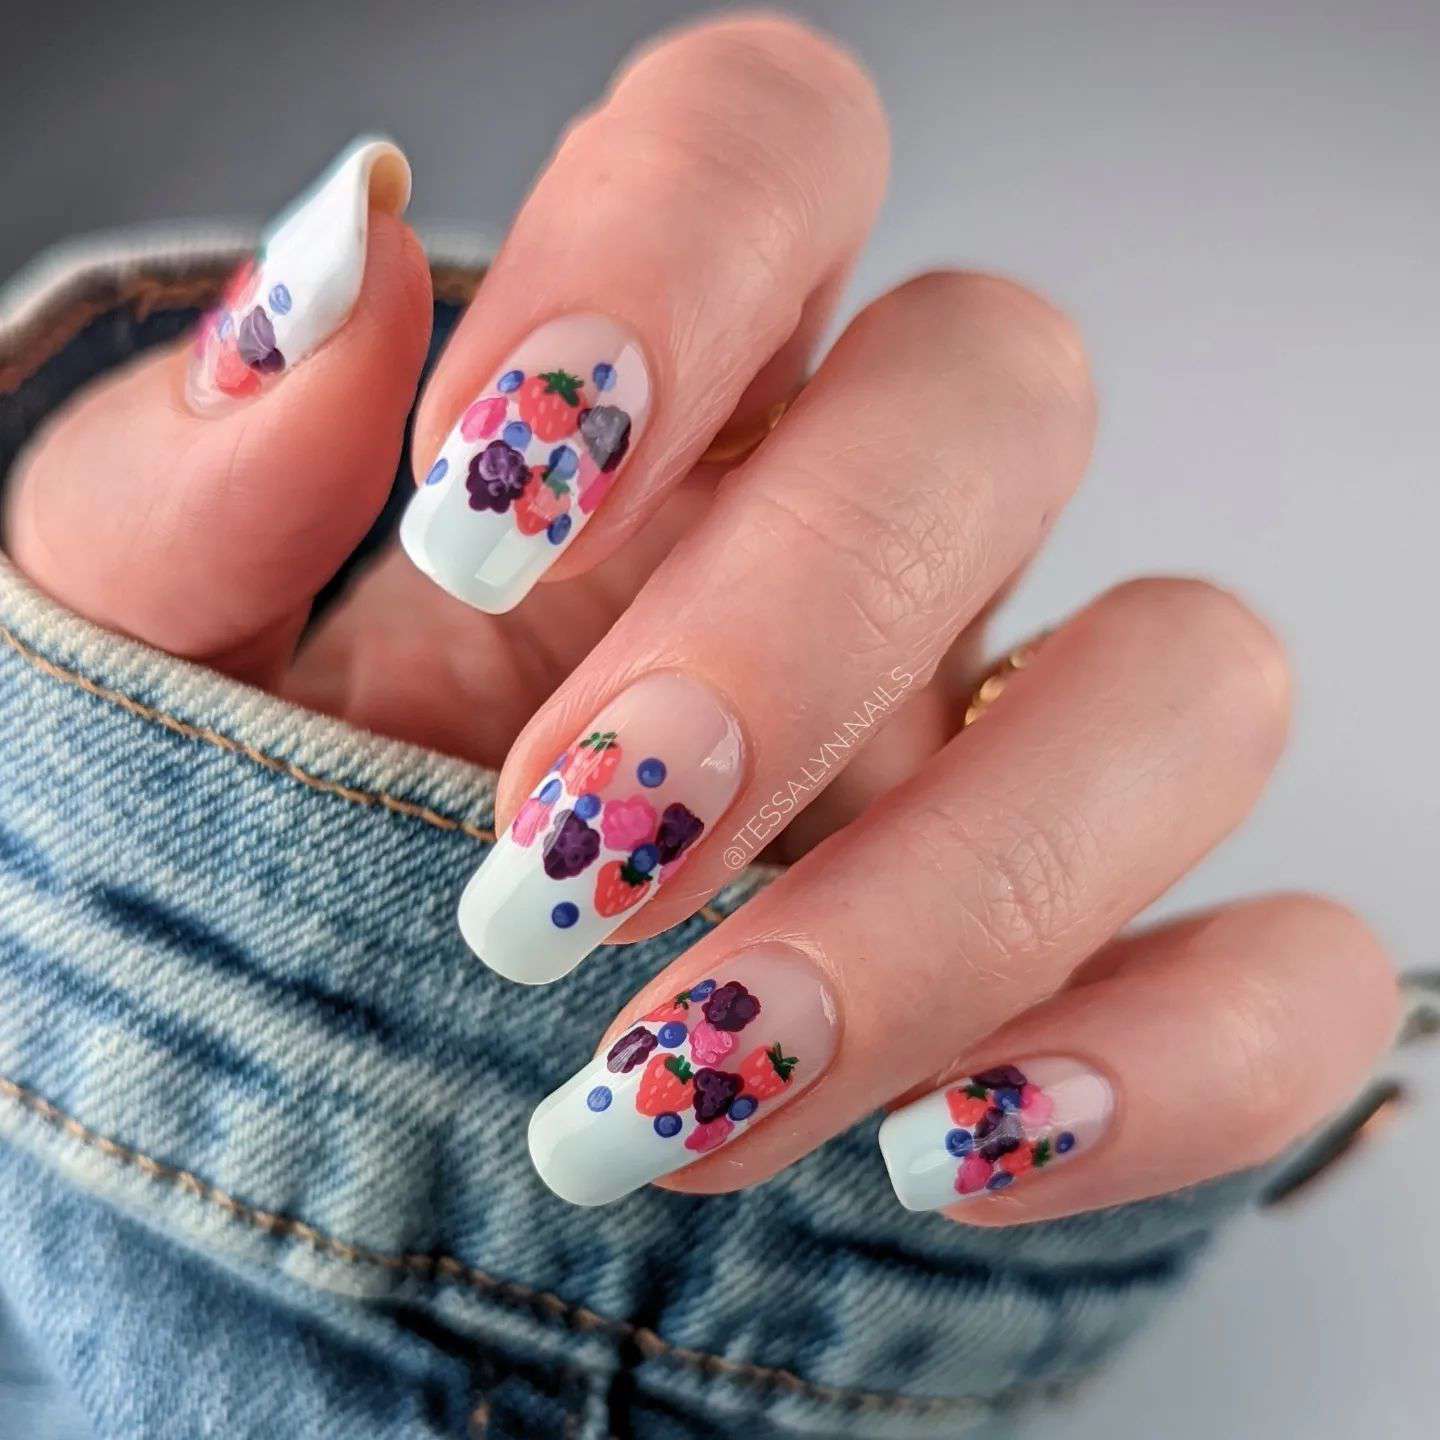 100+ Must Try Fall Nail Art Designs And Nail Ideas images 79